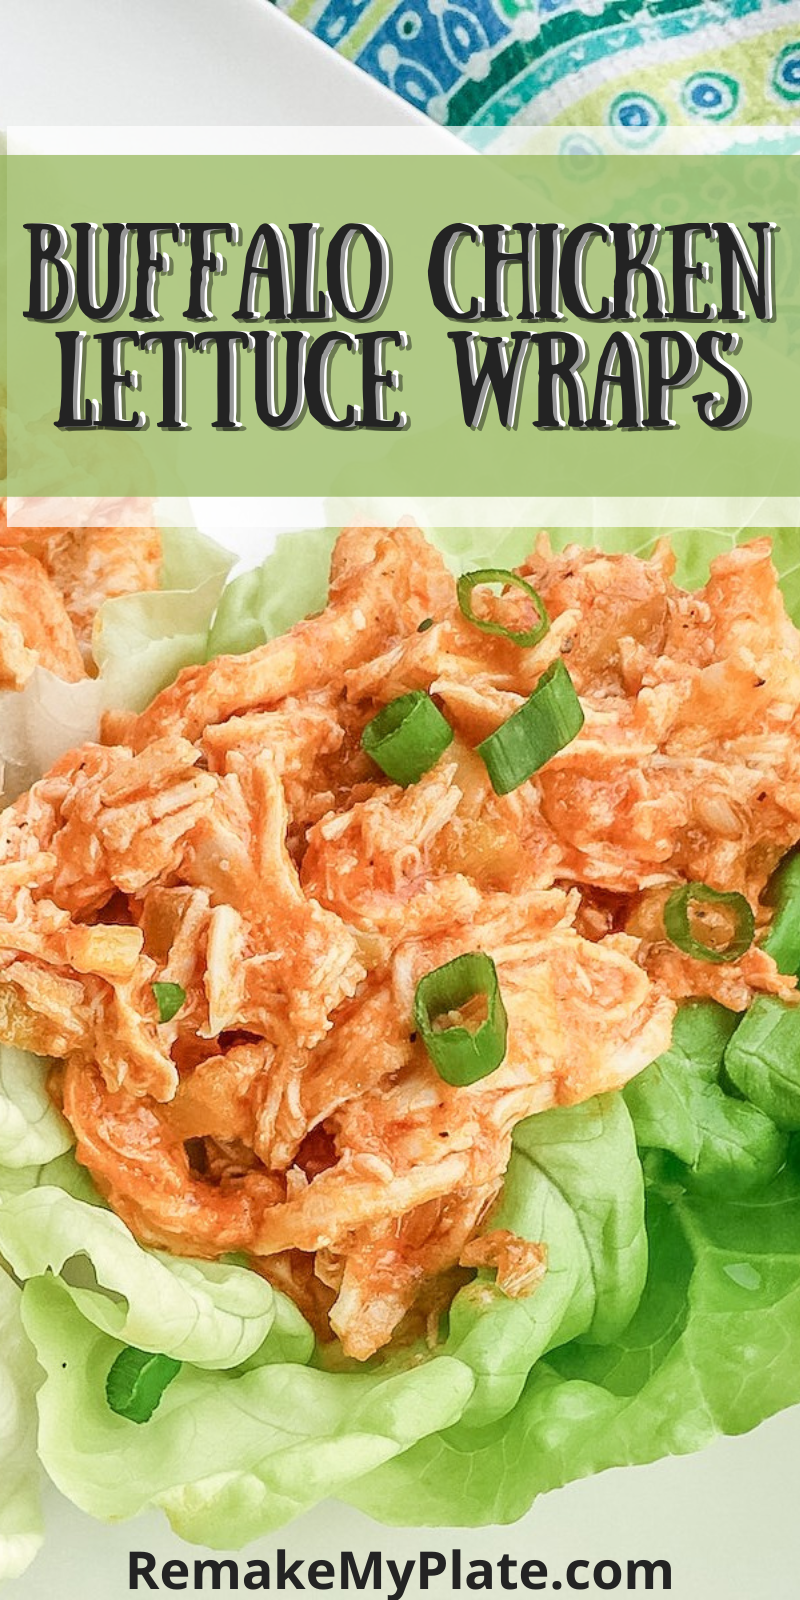 If you love Buffalo chicken but are looking for something a bit healthier then this easy to make Buffalo Chicken Lettuce Wraps will be your new favorite meal. This delicious low carb meal uses easy to make shredded chicken and are packed with tangy buffalo sauce. They make a quick weeknight dinner, lunch for work or school and even a nice high protein snack. #buffalochicken #lettucewraps #easyrecipes #dinnerrecipes #ketorecipes